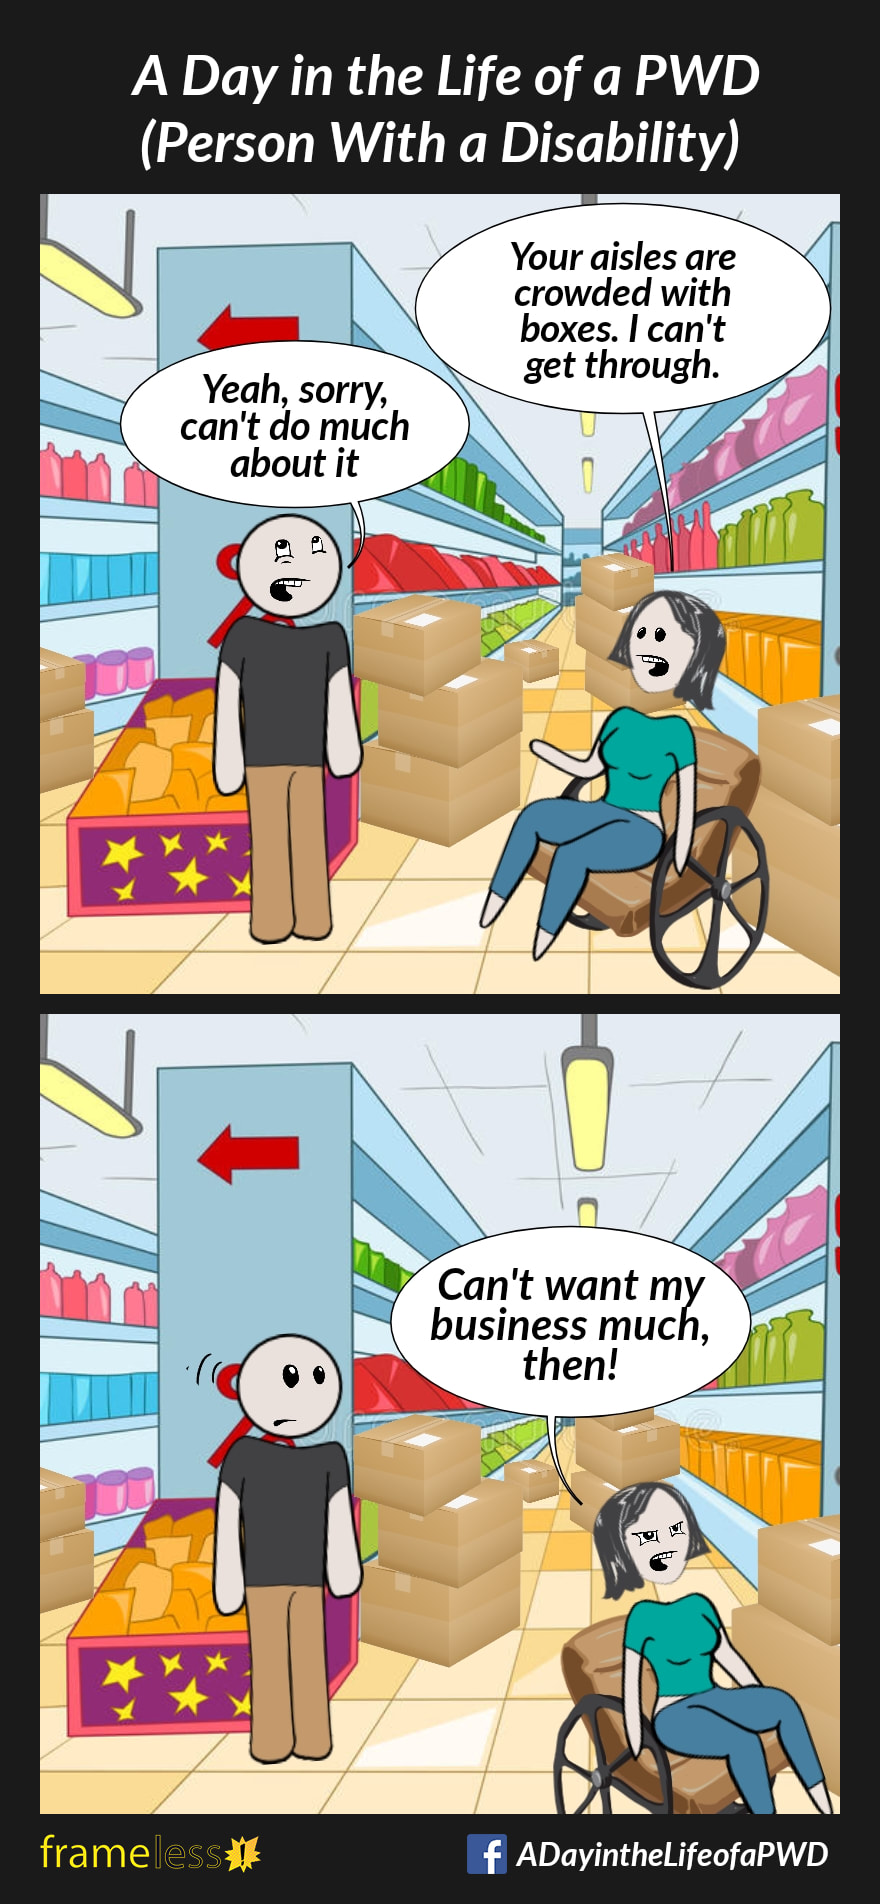 COMIC STRIP 
A Day in the Life of a PWD (Person With a Disability) 

Frame 1:
A woman in a wheelchair is speaking with an employee inside a store. The aisles in the store are crowded with stacked boxes.
WOMAN: Your aisles are crowded with boxes. I can't get through.
EMPLOYEE: Yeah, sorry, can't do much about it

Frame 2:
WOMAN (leaving the store): You don't want my business much, then!